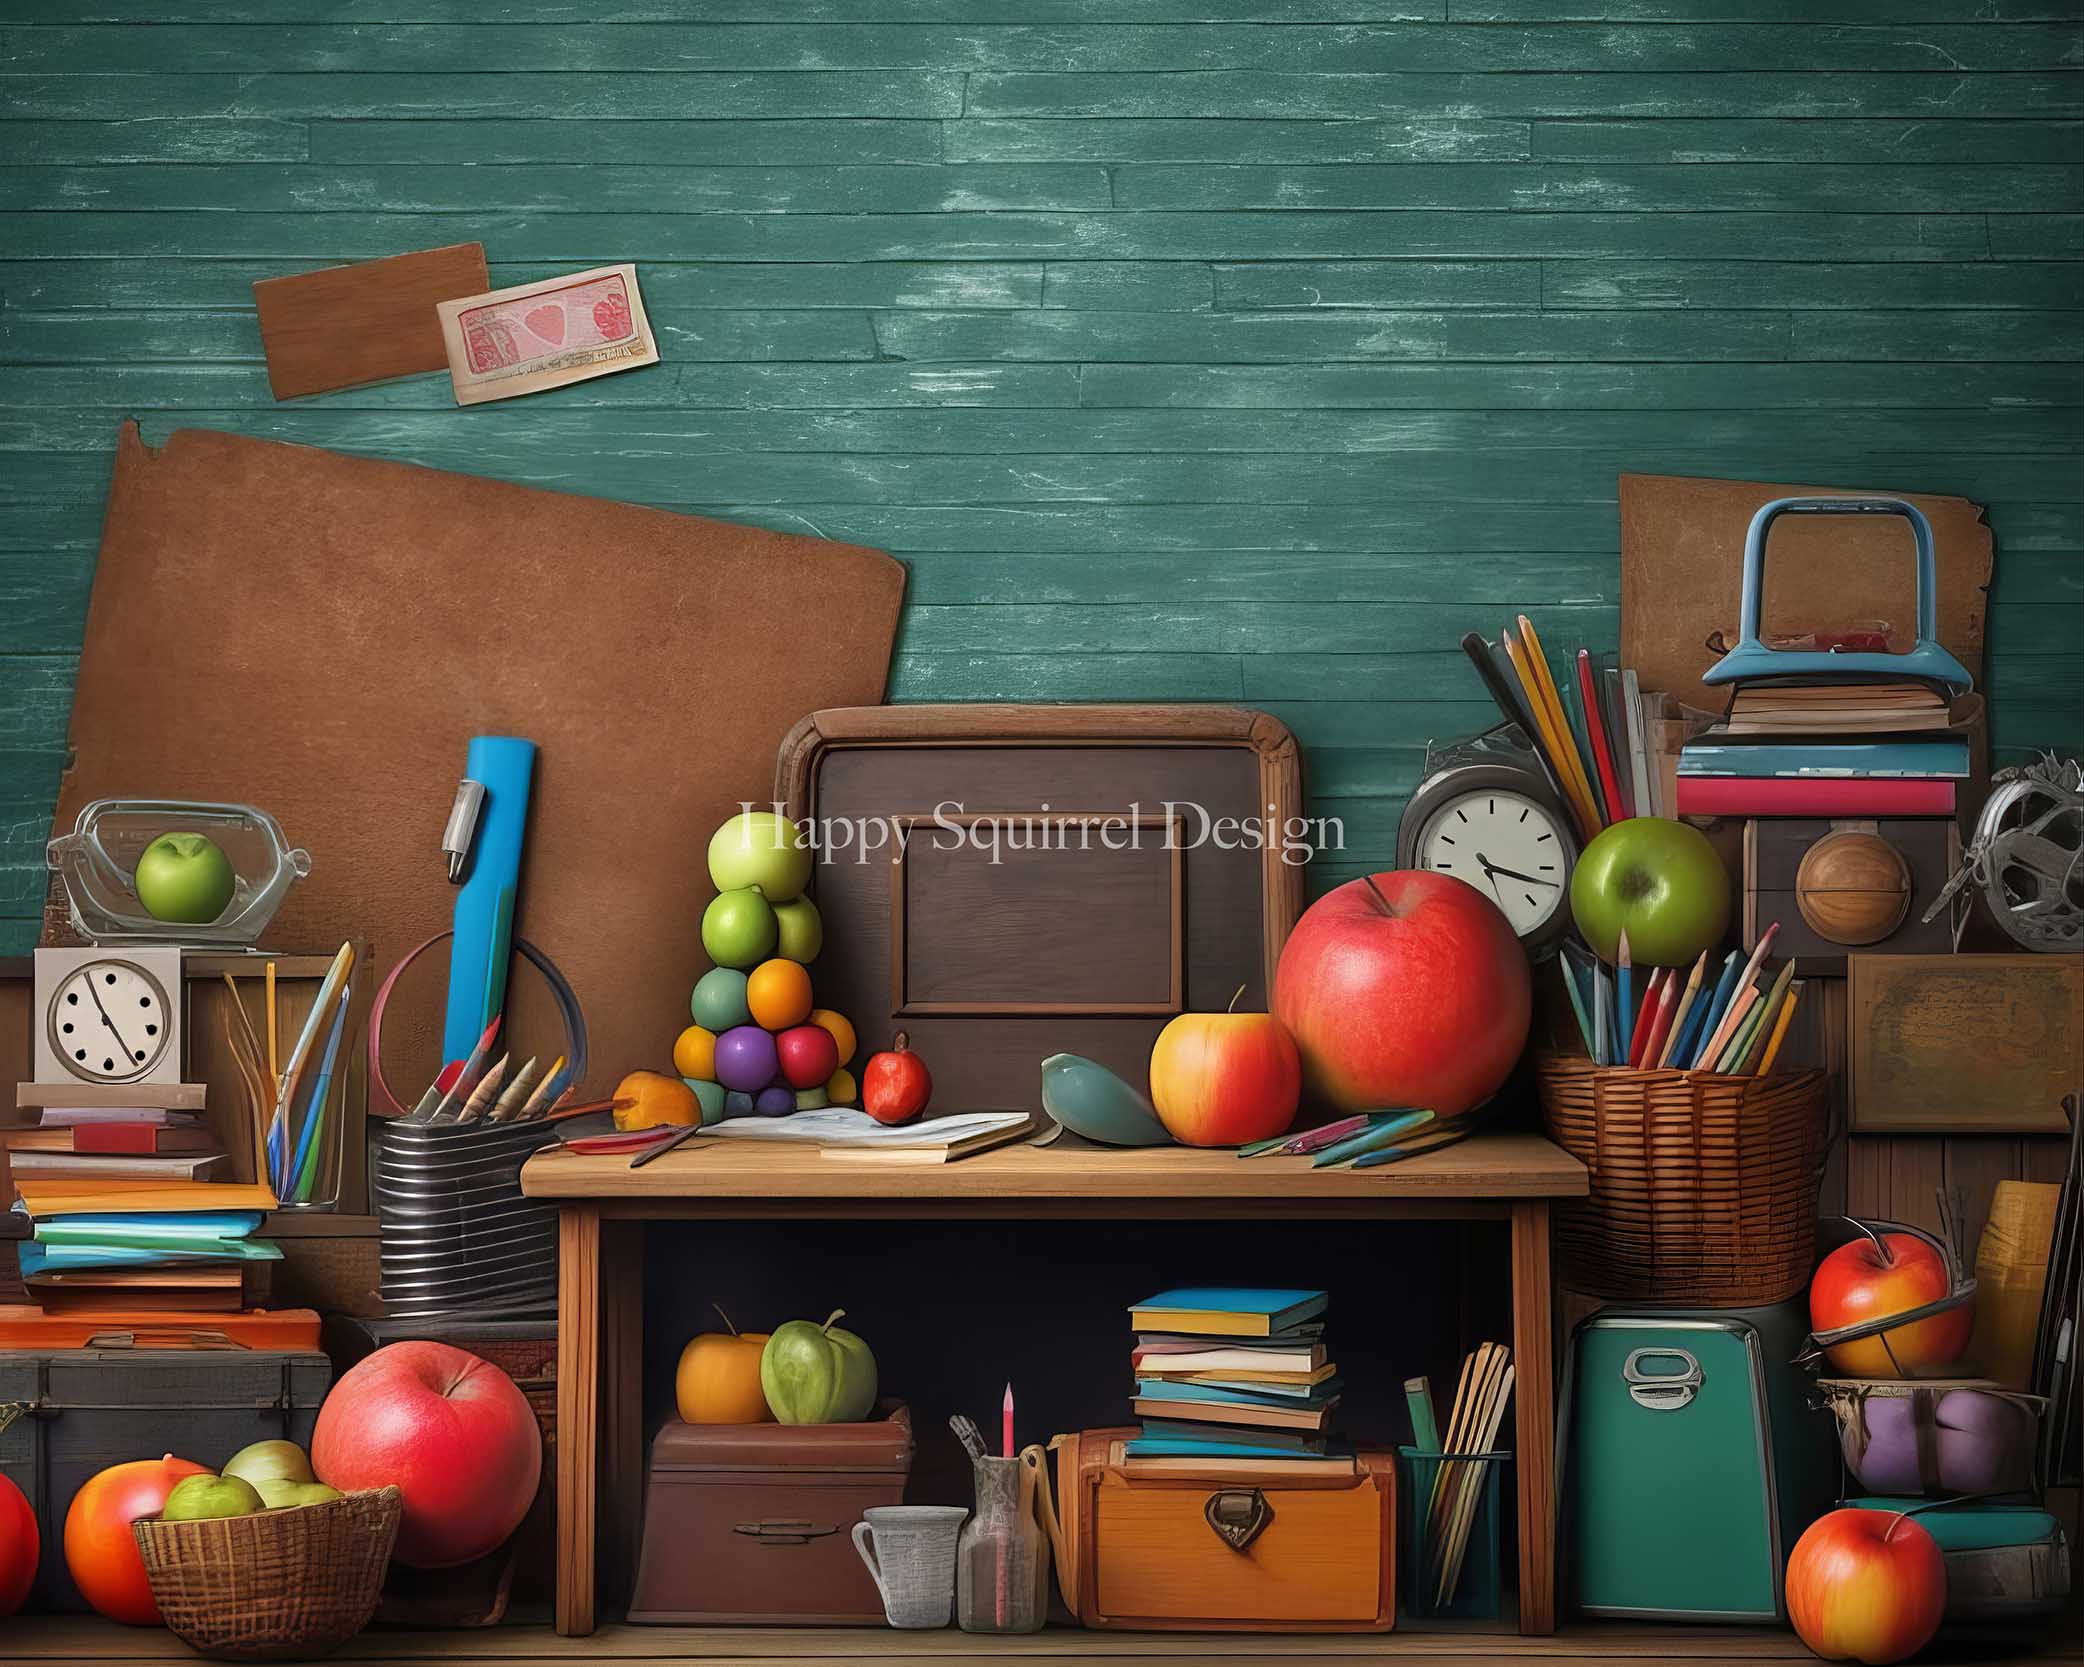 Kate Back to School Teachers Pet Classroom Backdrop Designed by Happy Squirrel Design